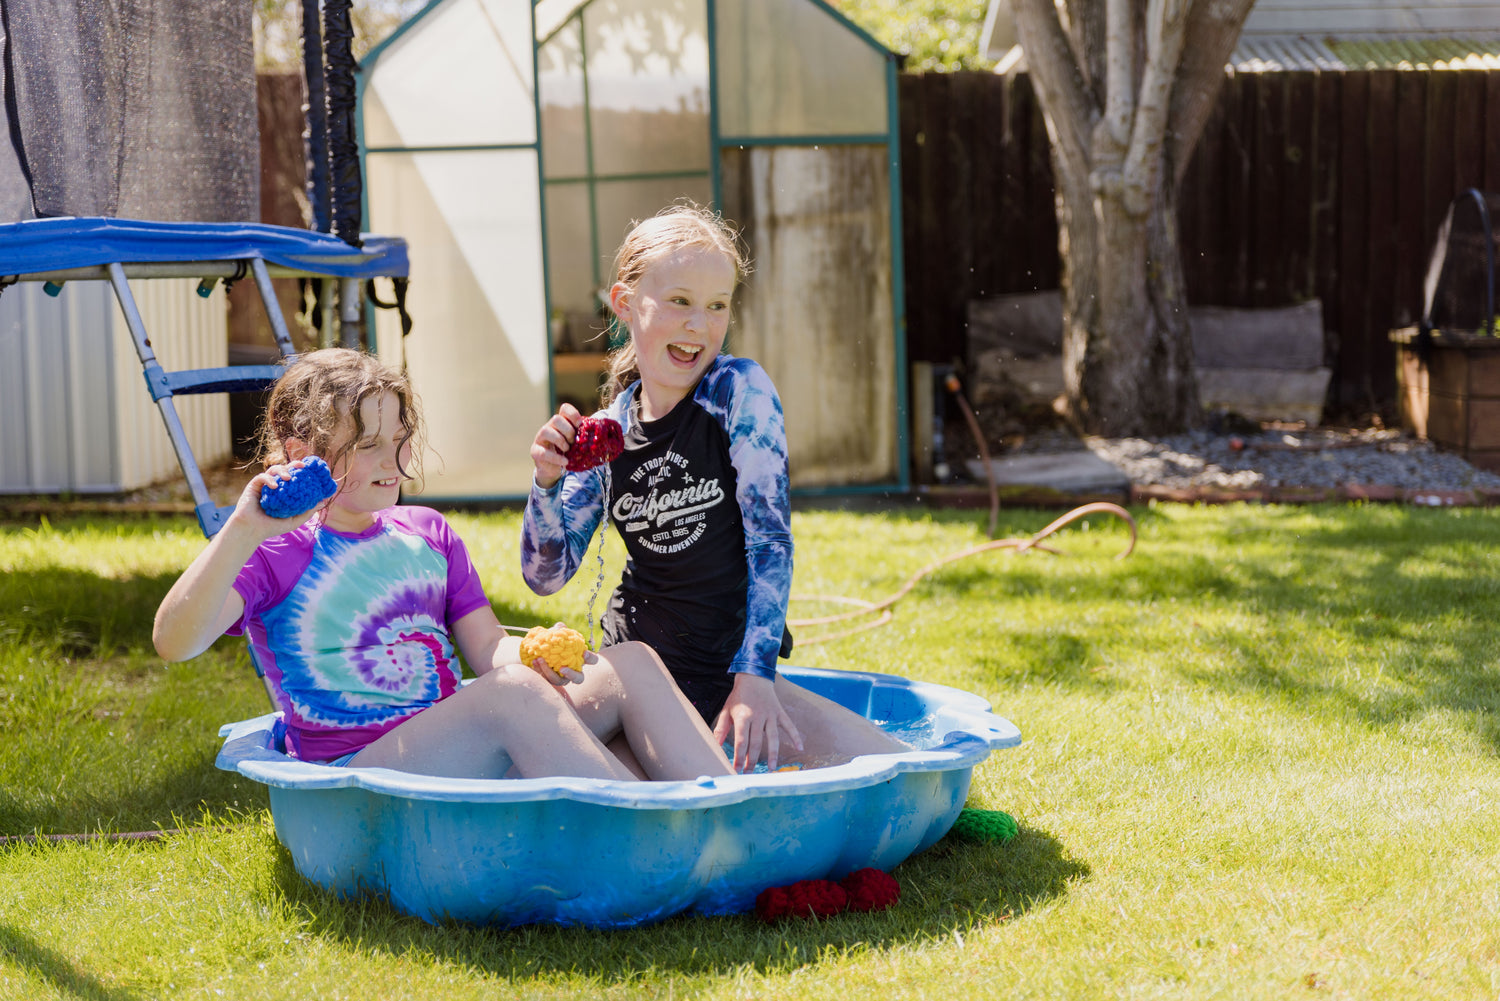 Two 11 year old girls sitting in a clam shell paddling pool in a garden, laughing and holding EcoSplat Reusable Water Balloons ready to throw them. One girl holds a red balloon and the other holds a yellow balloon and a blue balloon.